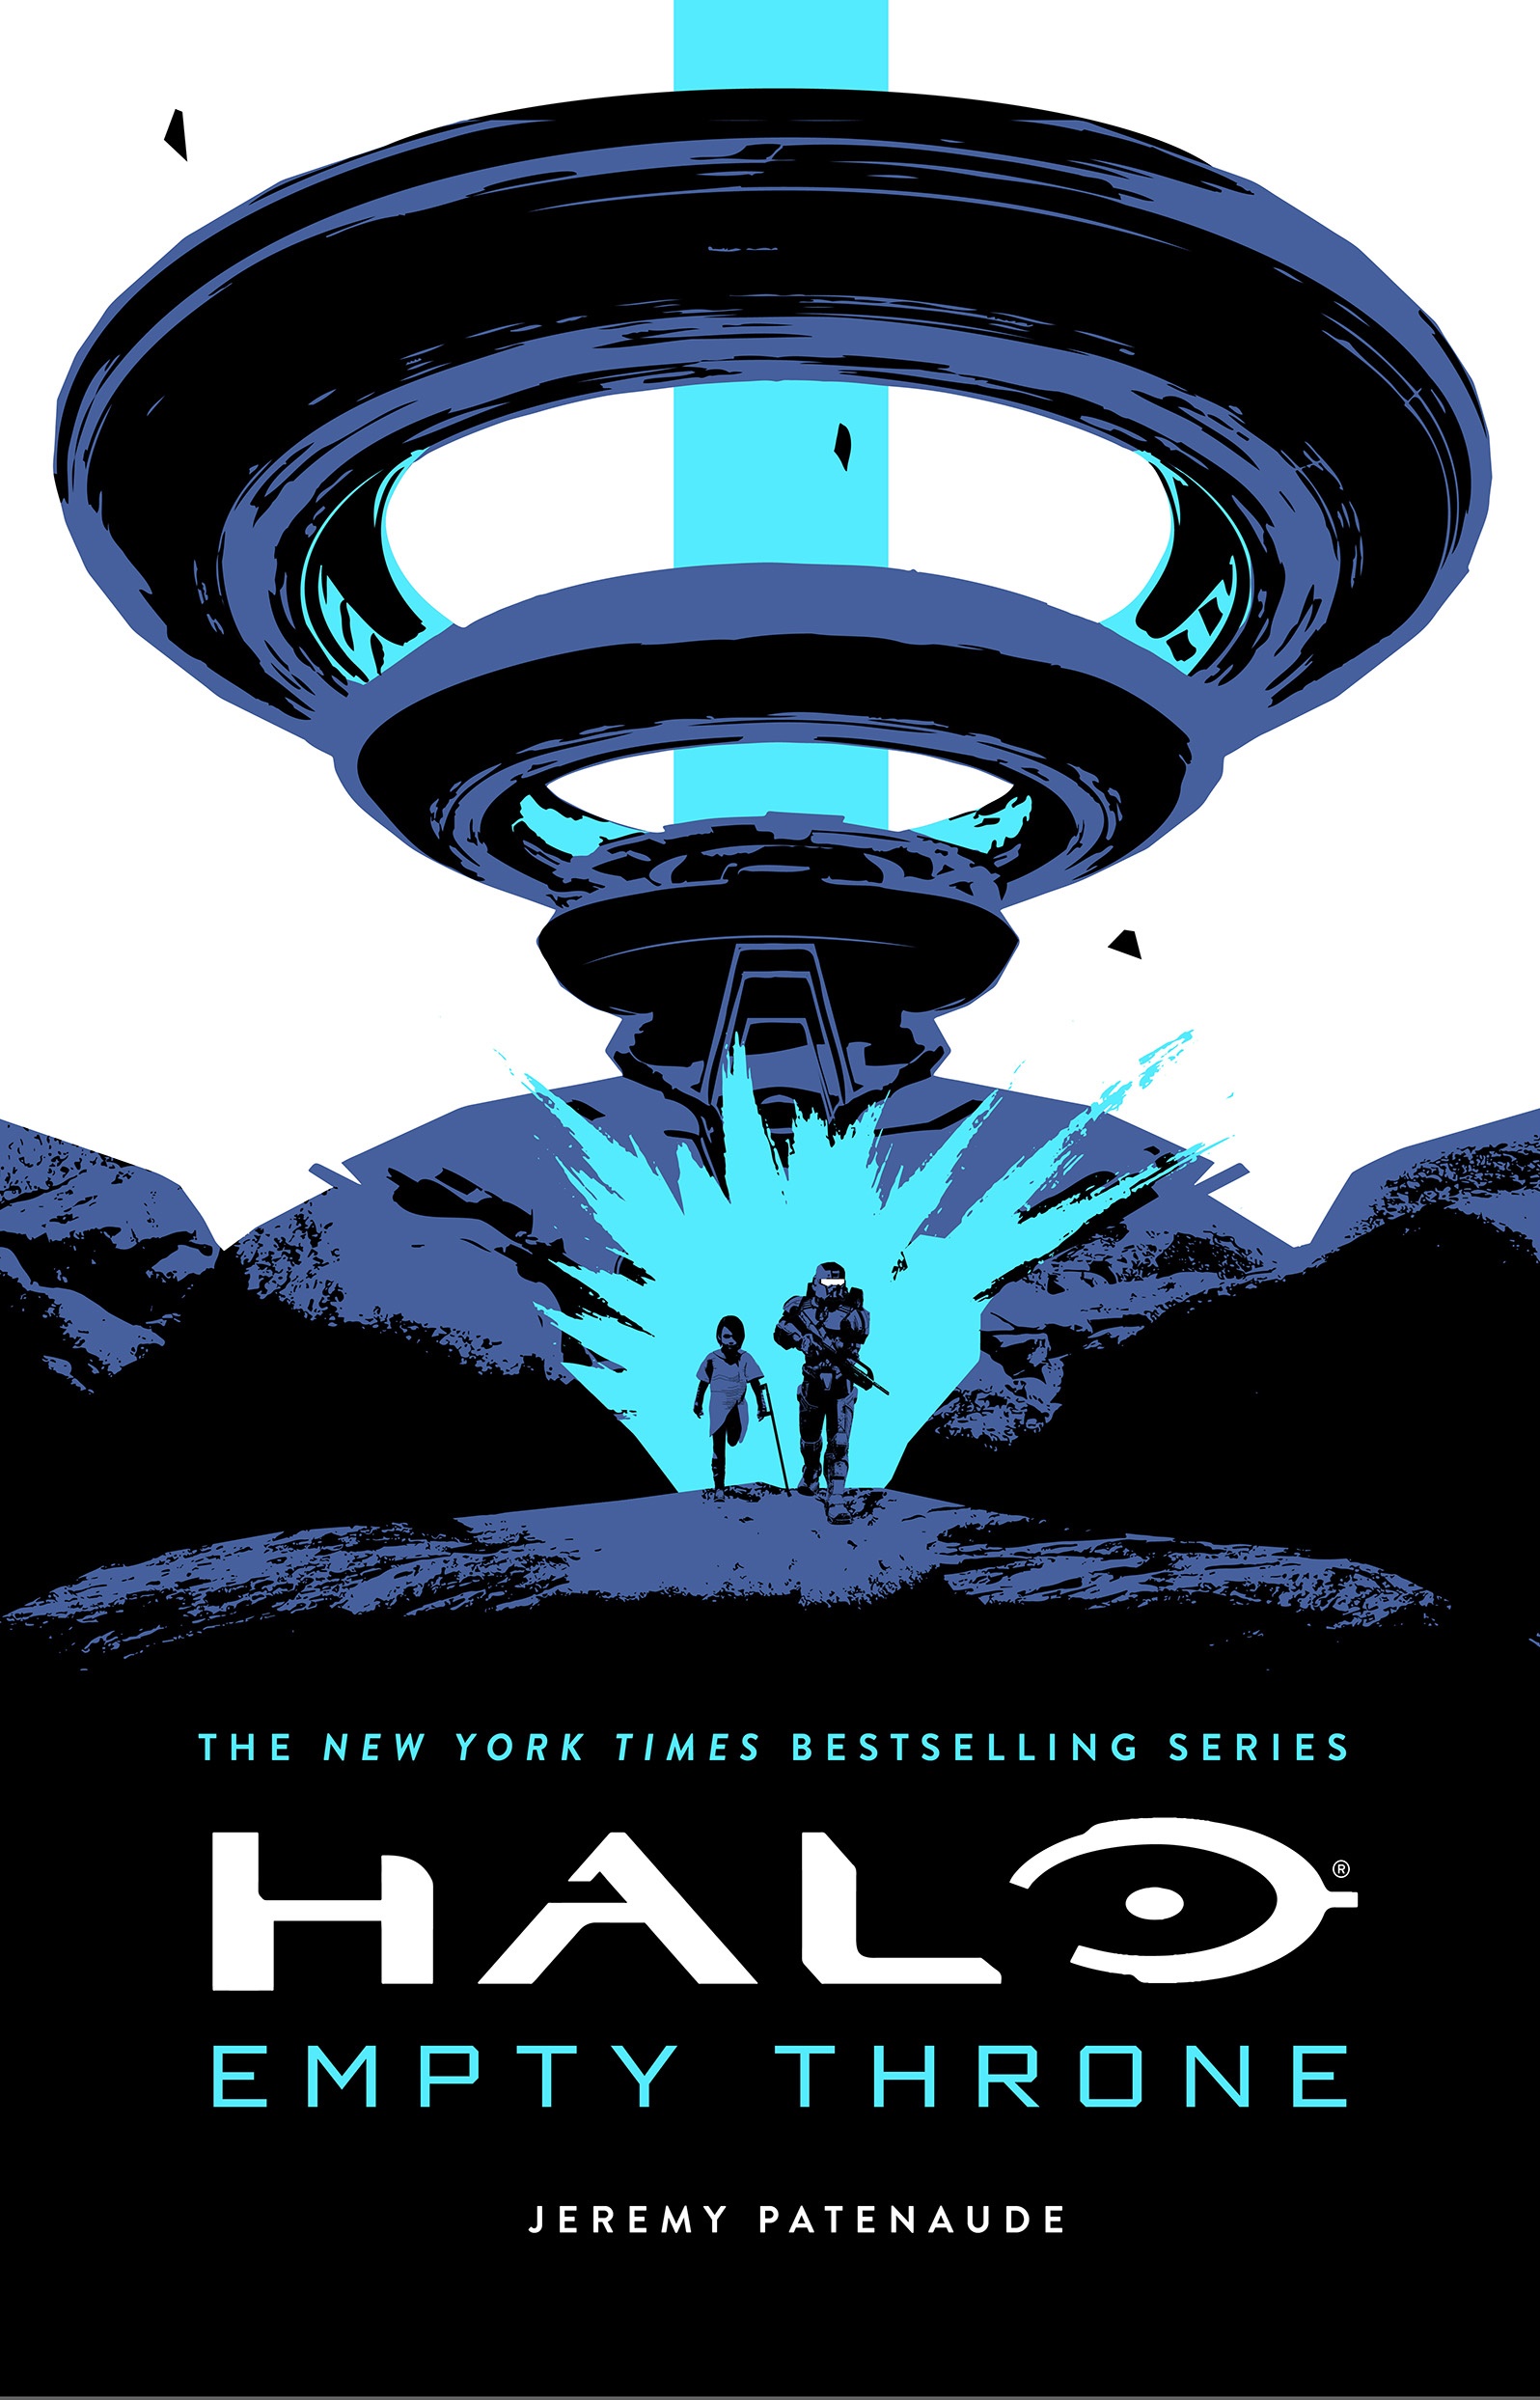 Cover art of Halo: Empty Throne illustrated by Will Staehle depicting a young girl and a Spartan emerging from a blue explosion coming from a Forerunner structure